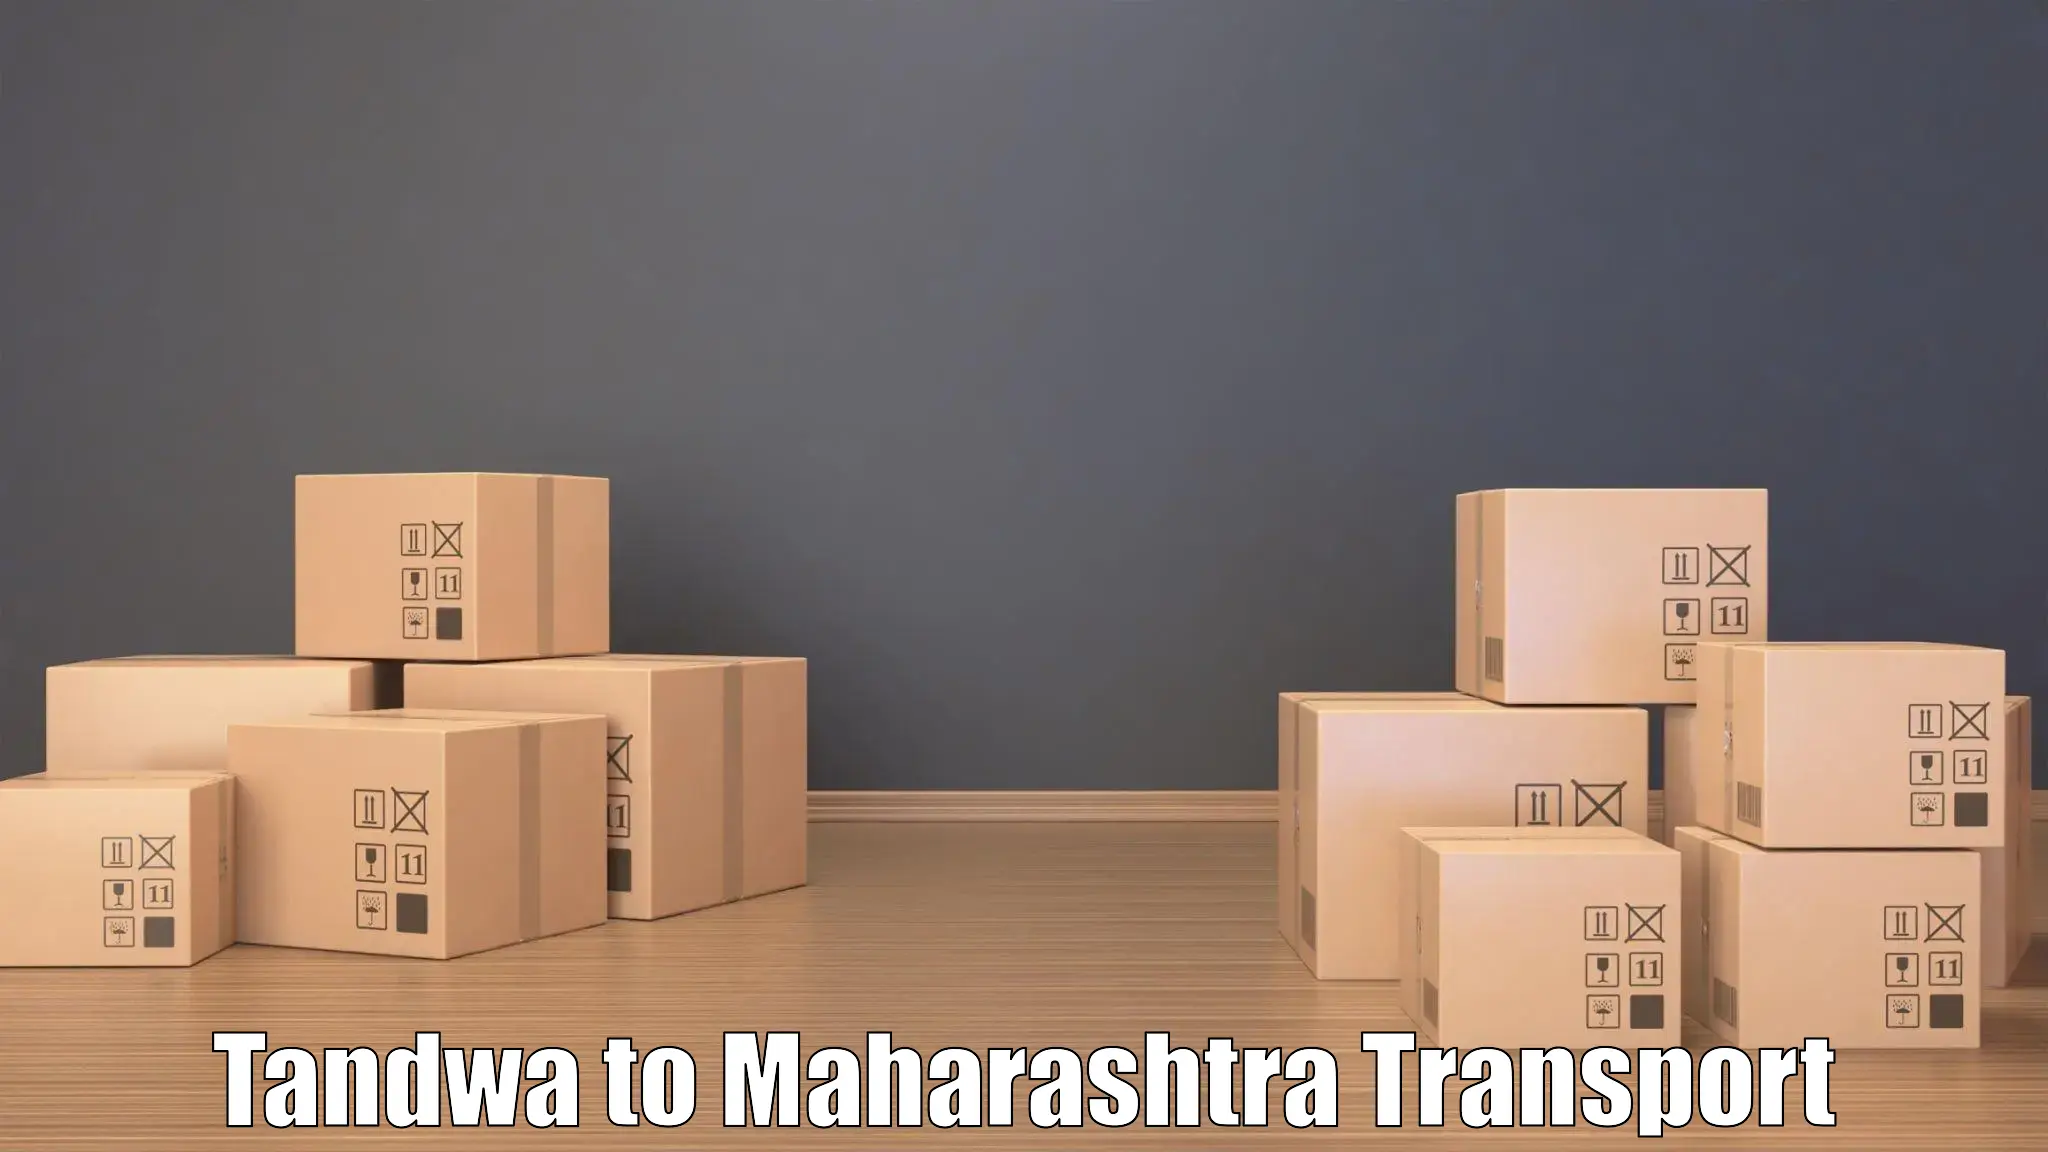 Truck transport companies in India Tandwa to Raver